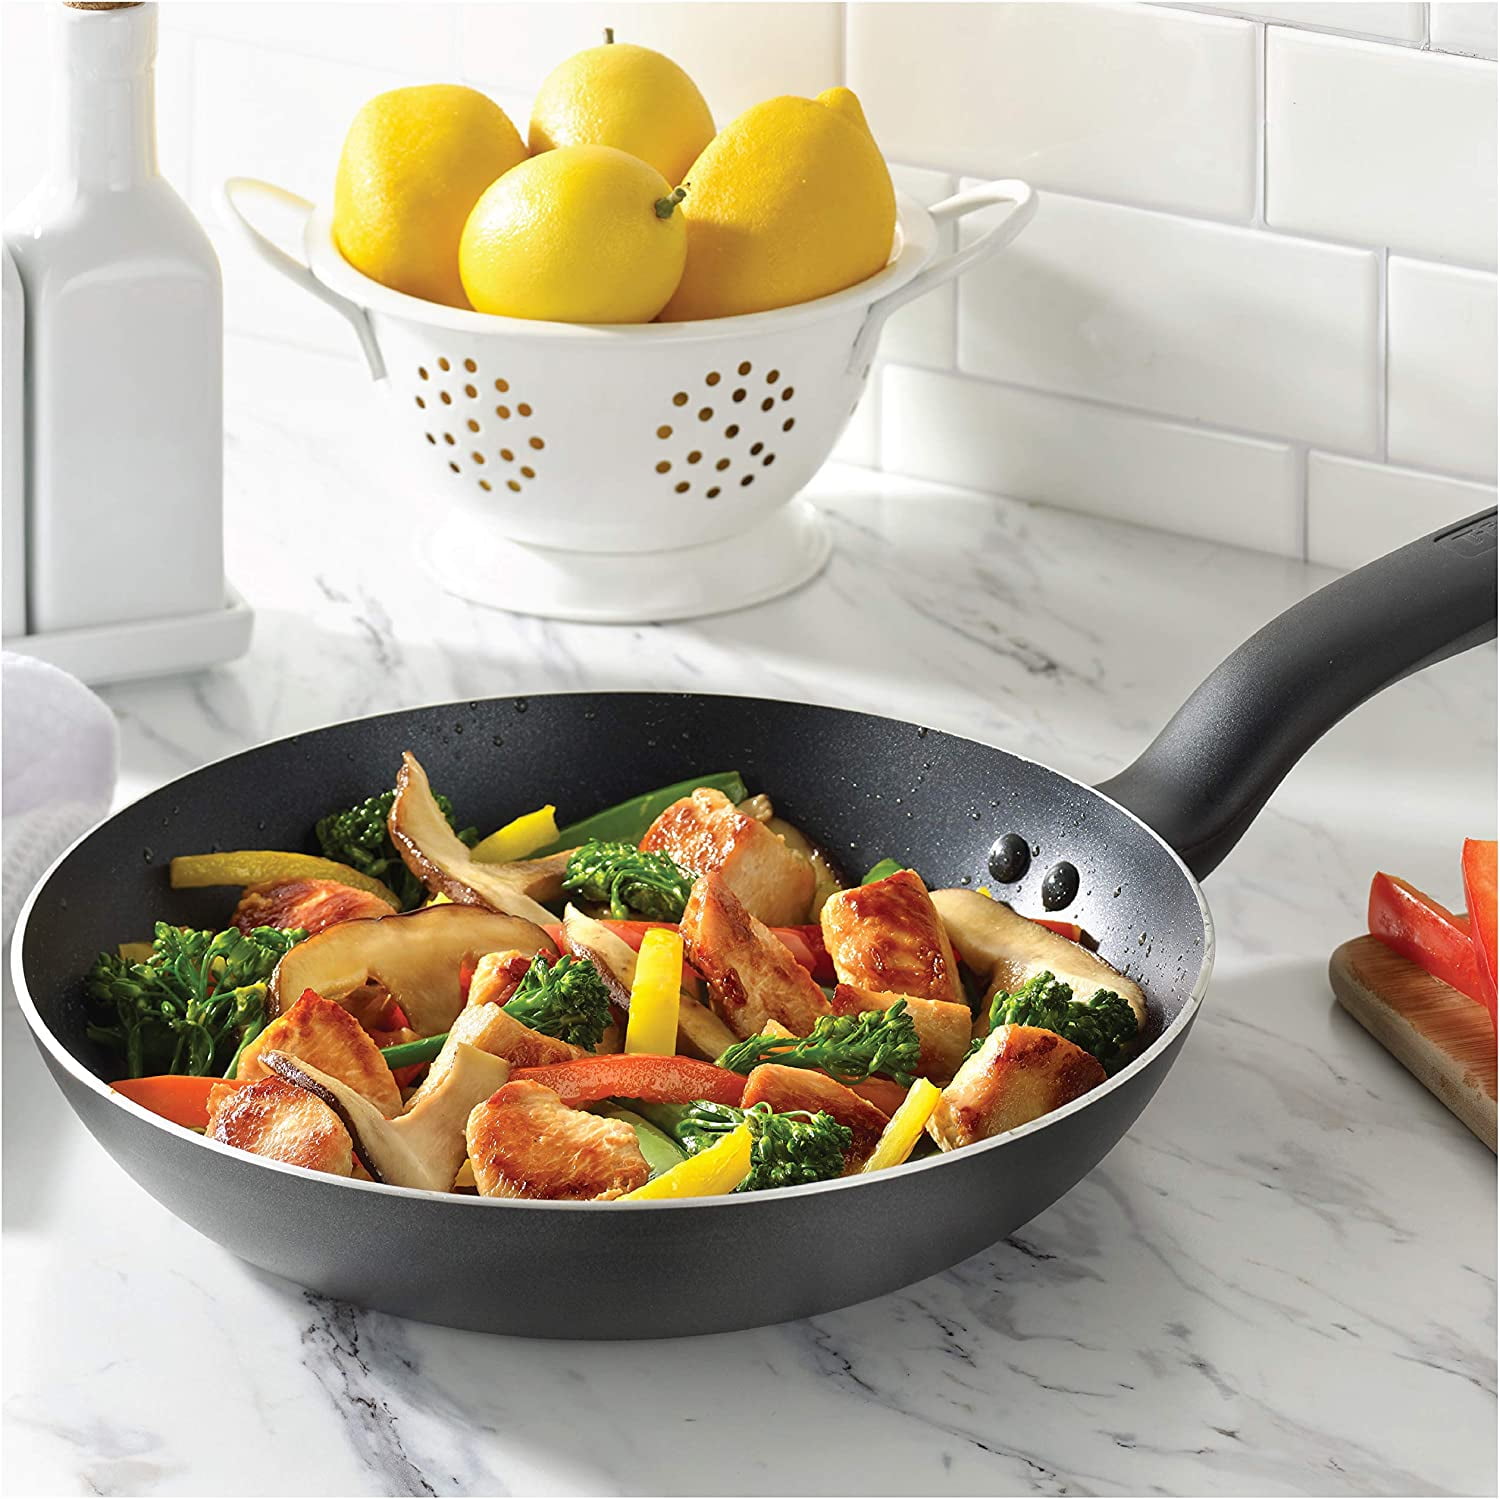 Nonstick Omelet Pan, Made of Durable Steel with a Teflon Coating, 10 ¾” Dia.